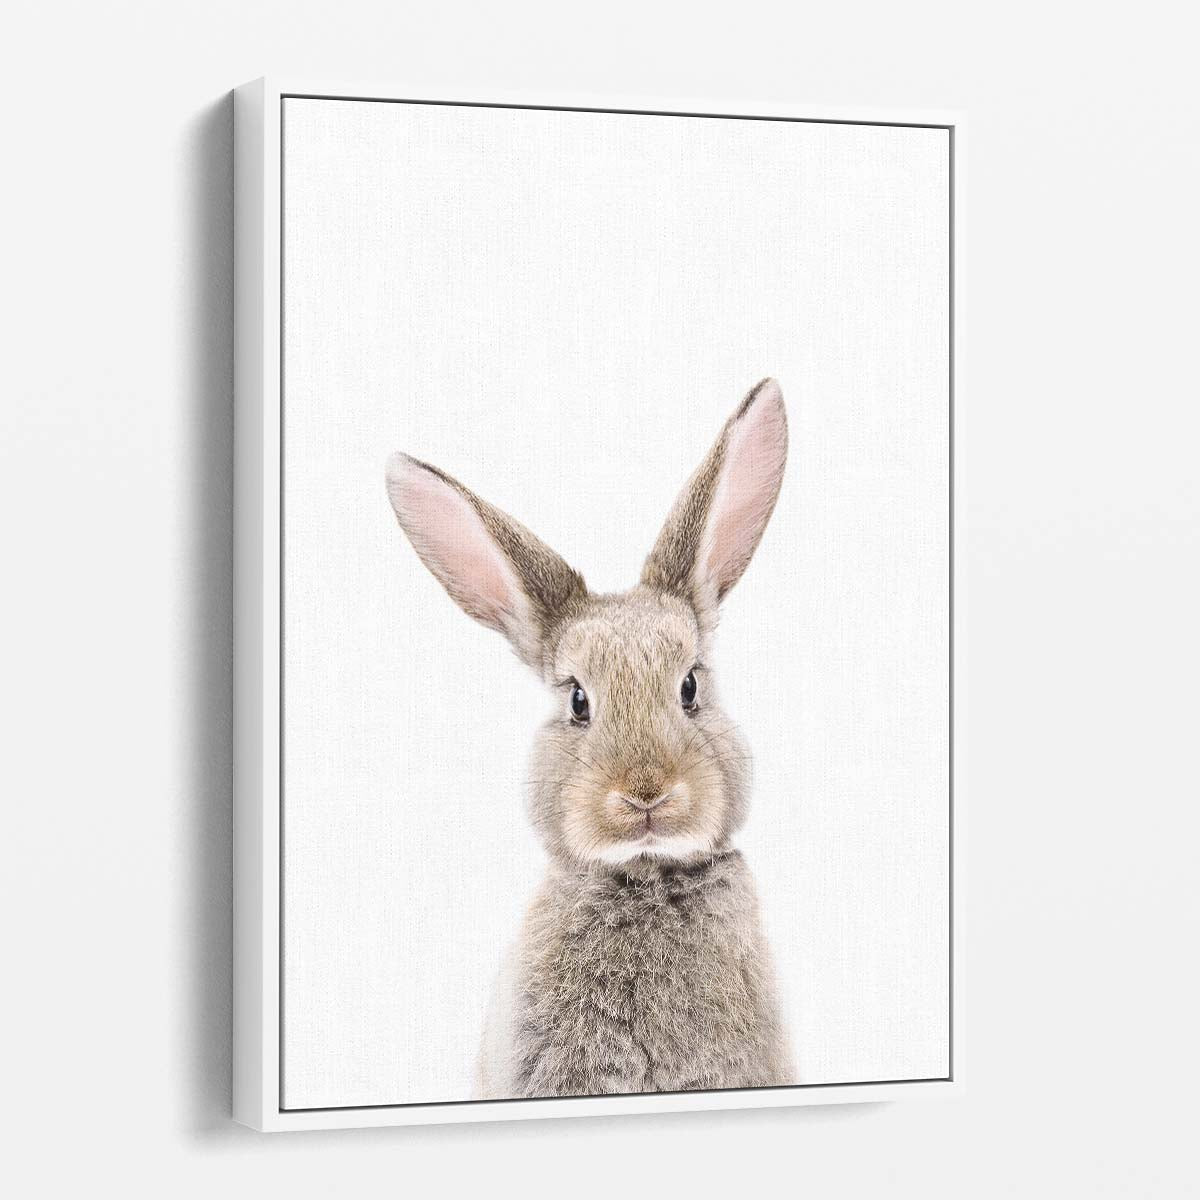 Baby Rabbit Close-Up Portrait Photography on Bright Background by Luxuriance Designs, made in USA